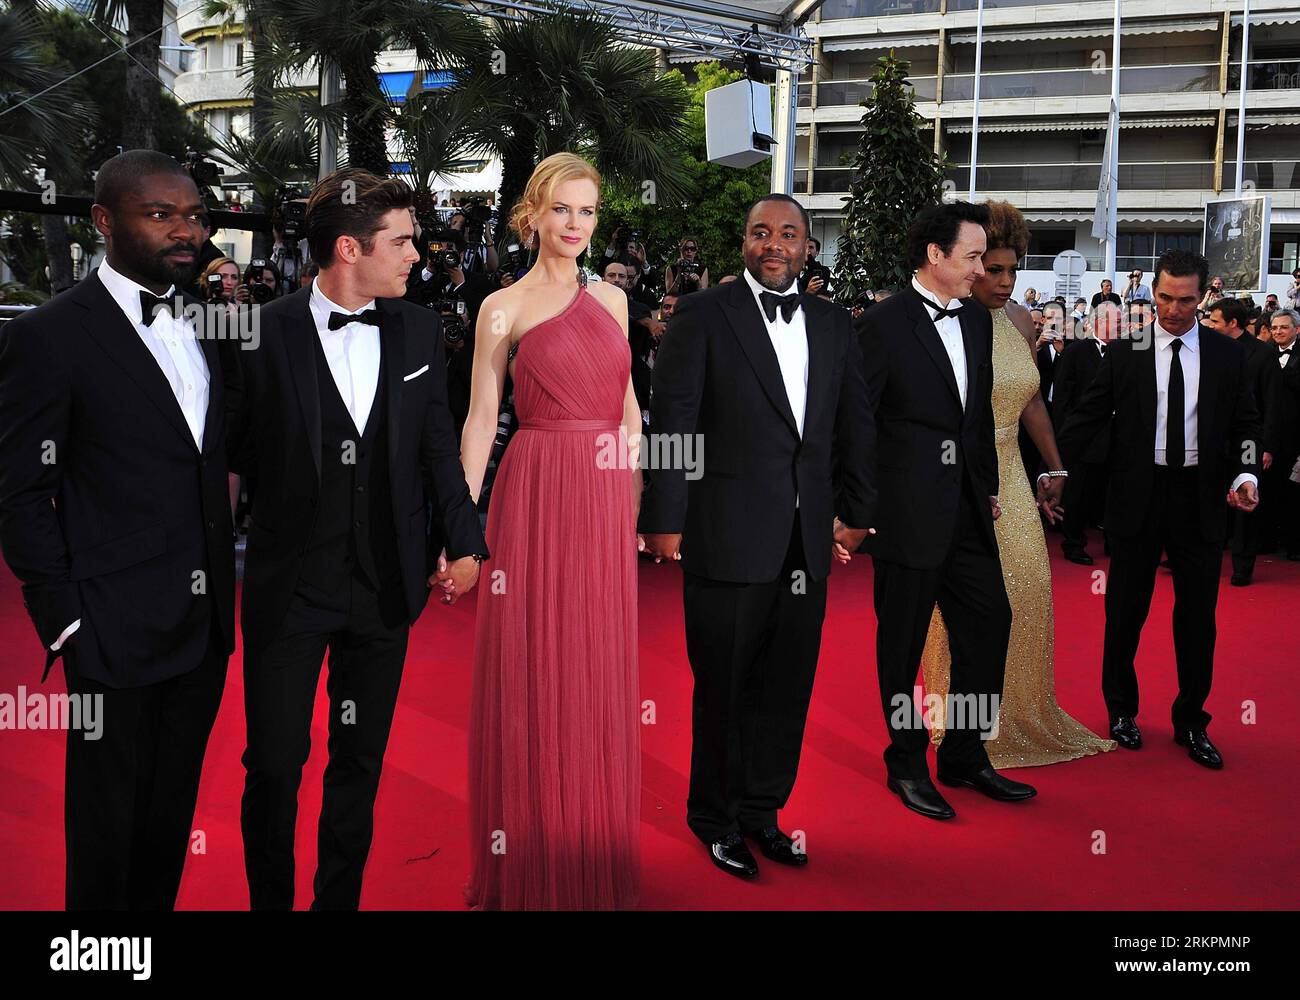 Bildnummer: 58027678  Datum: 24.05.2012  Copyright: imago/Xinhua (120524) -- CANNES, May 24, 2012 (Xinhua) -- Cast members of The Paperboy arrive for its premiere at the 65th Cannes Film Festival in Cannes, southern France, May 24, 2012. (Xinhua/Ye Pingfan) FRANCE-CANNES-FILM FESTIVAL-PREMIERE-PAPERBOY PUBLICATIONxNOTxINxCHN Kultur Entertainment People Film 65. Internationale Filmfestspiele Cannes Filmpremiere Premiere x0x xub 2012 quer premiumd      58027678 Date 24 05 2012 Copyright Imago XINHUA  Cannes May 24 2012 XINHUA Cast Members of The Paperboy Arrive for its Premiere AT The 65th Canne Stock Photo